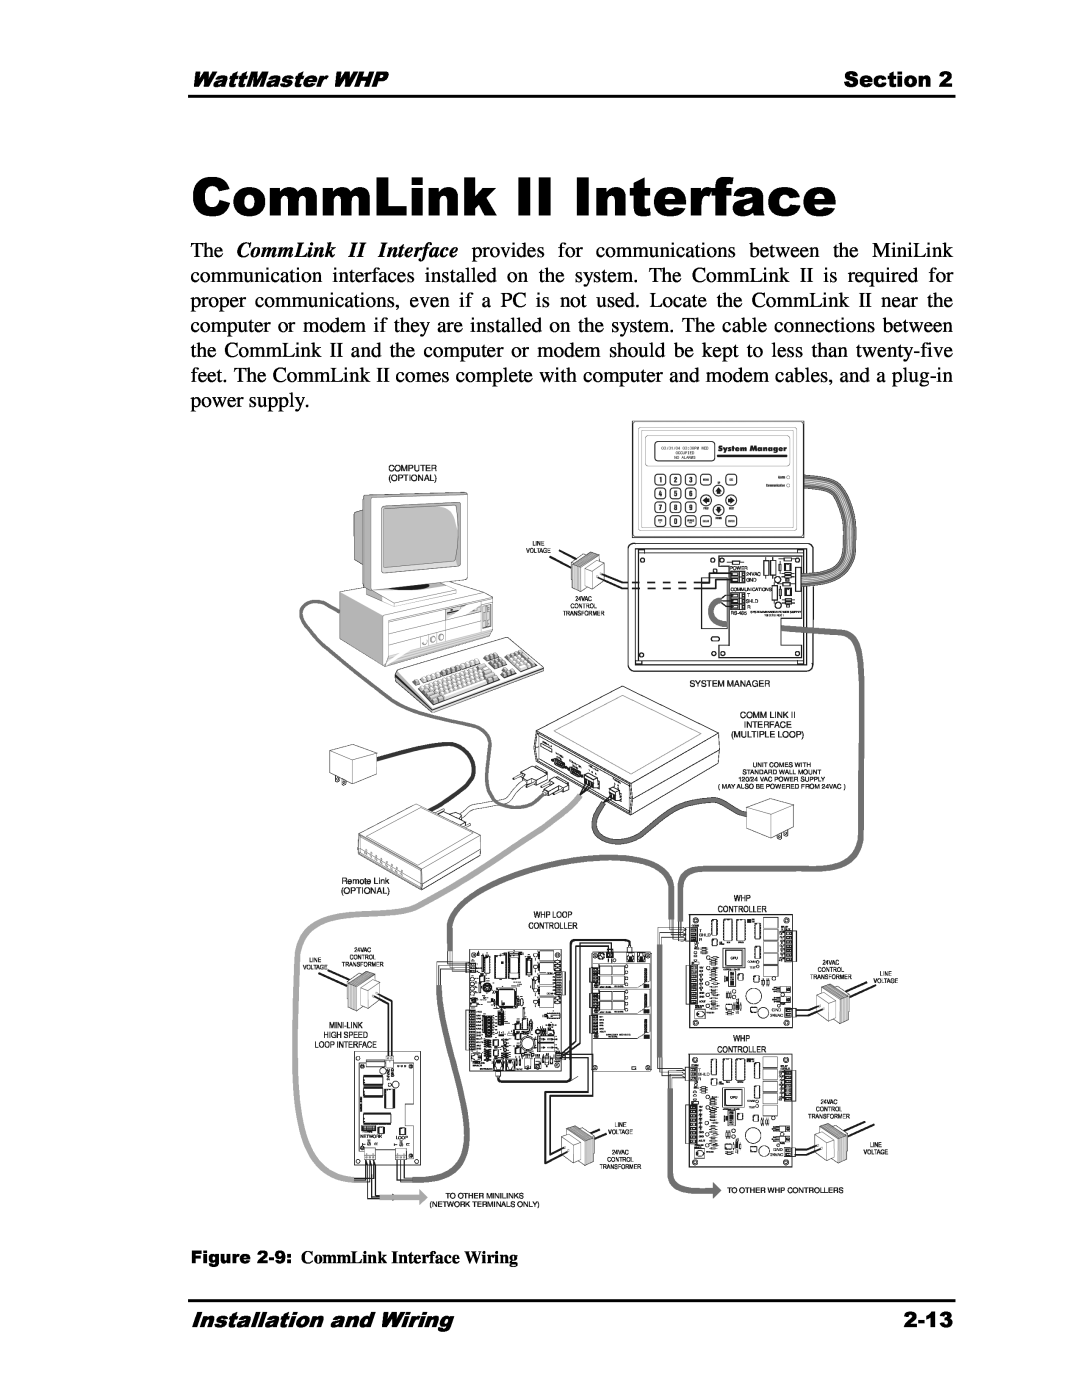 Heat Controller Water Source Heat Pump manual CommLink II Interface, WattMaster WHP, Section, 2-13, Installation and Wiring 